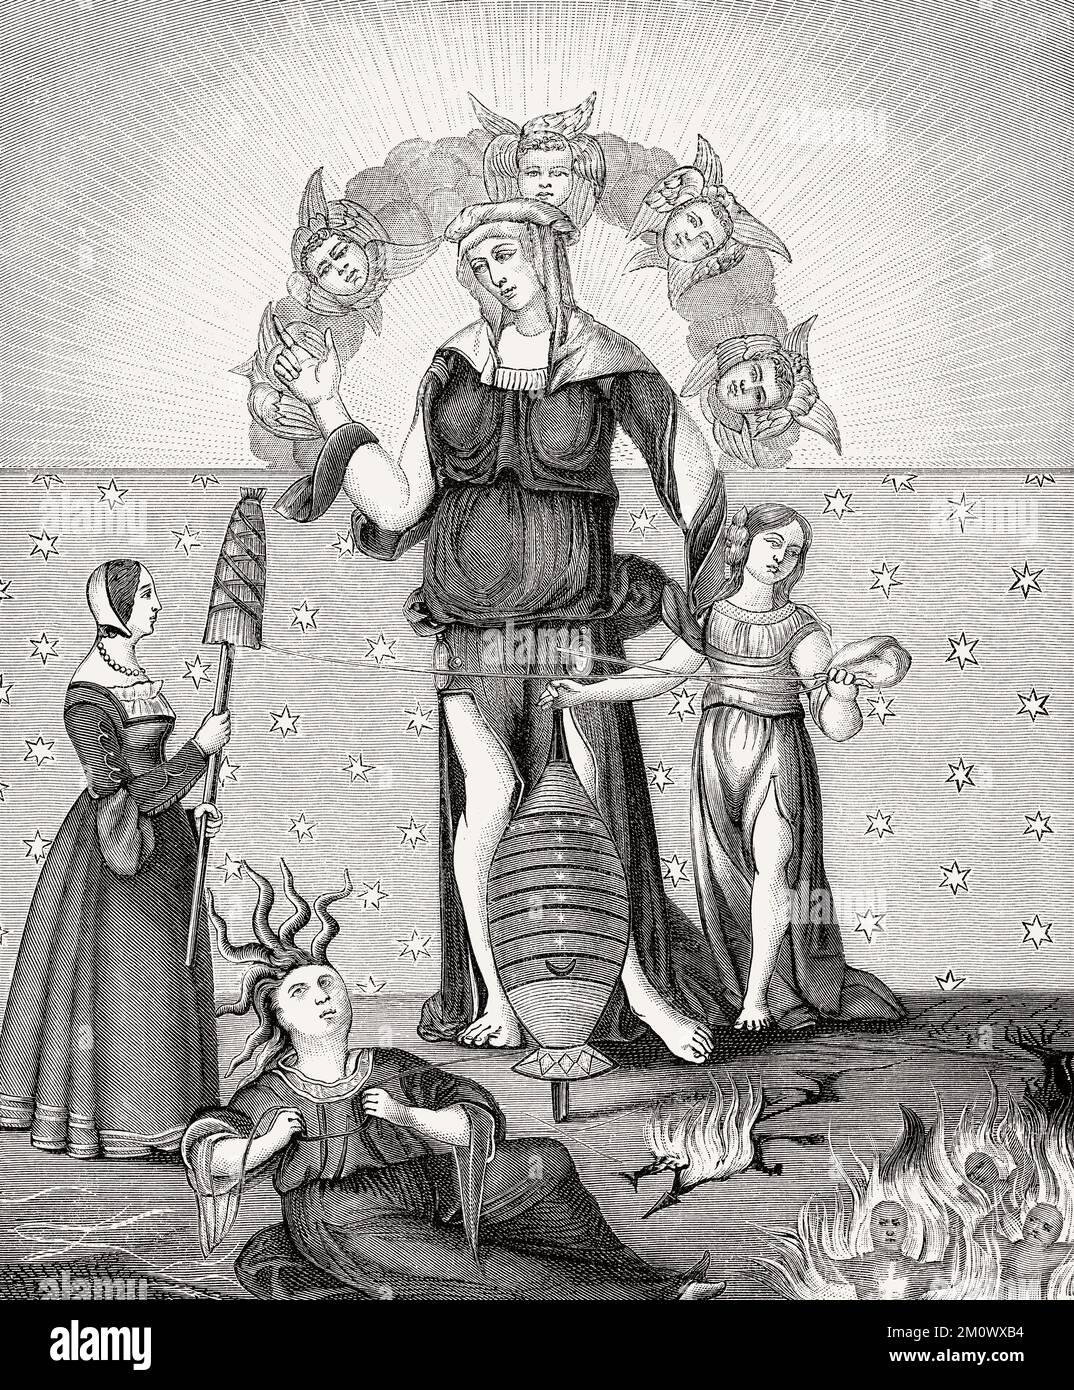 Allegorical illustration of the Dame Astrology with the Three Fates, after a 16th century French manuscript Stock Photo